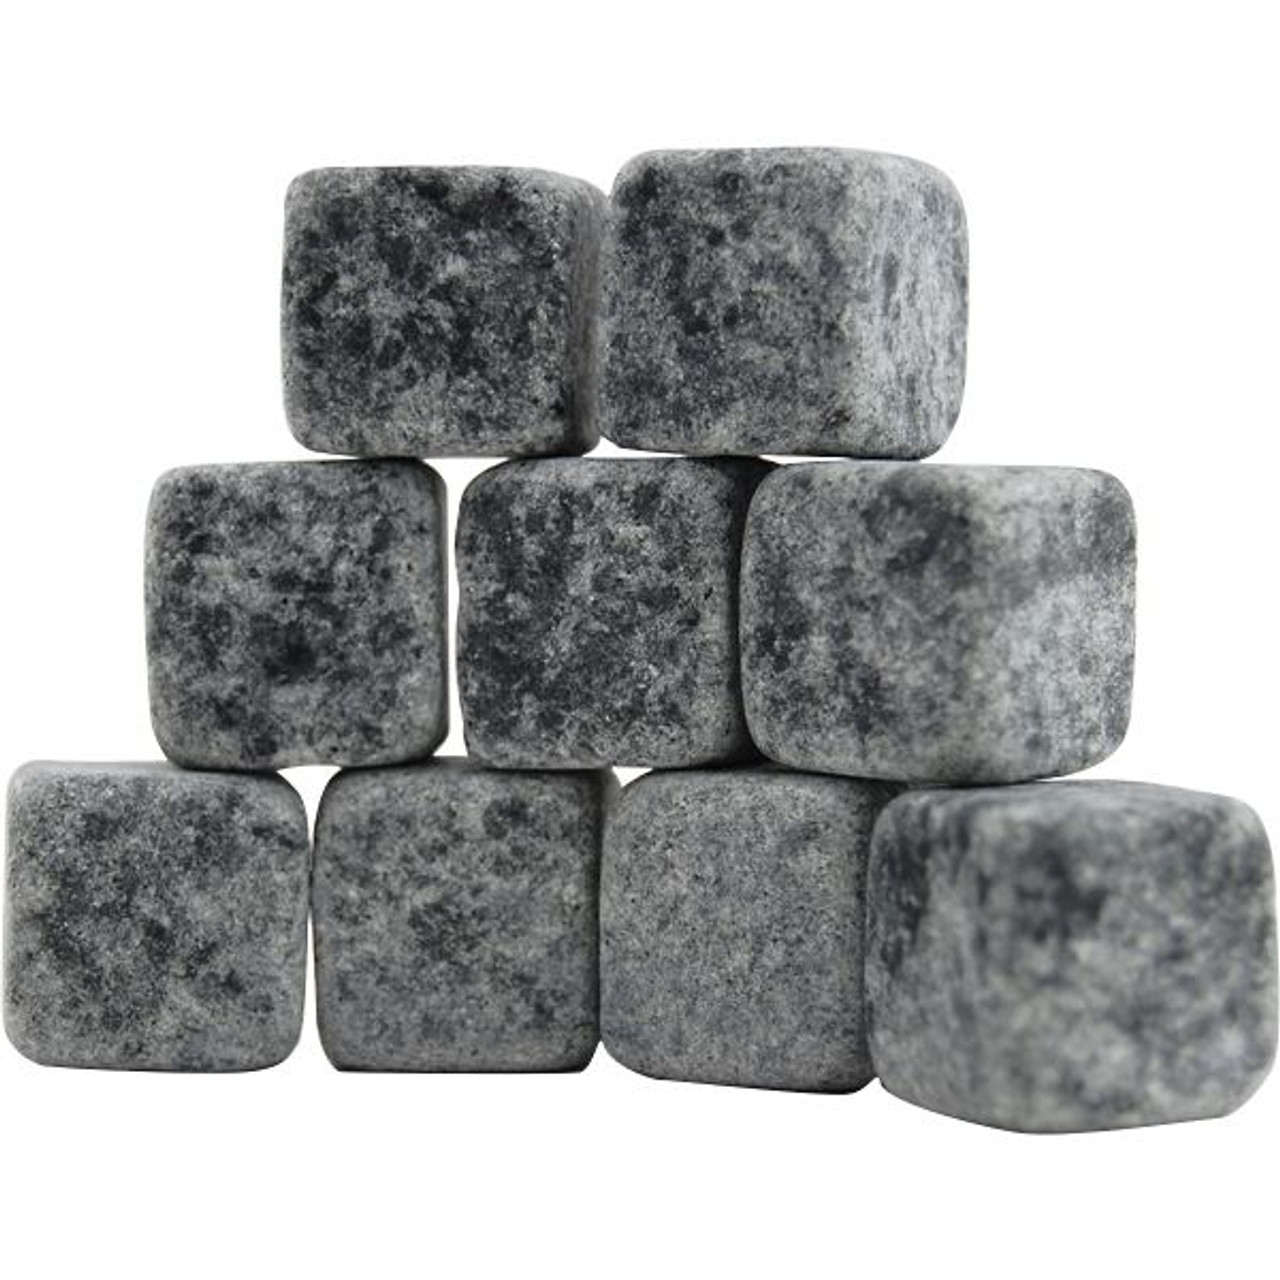 Whisky Stones: Chill your liquor without diluting it.